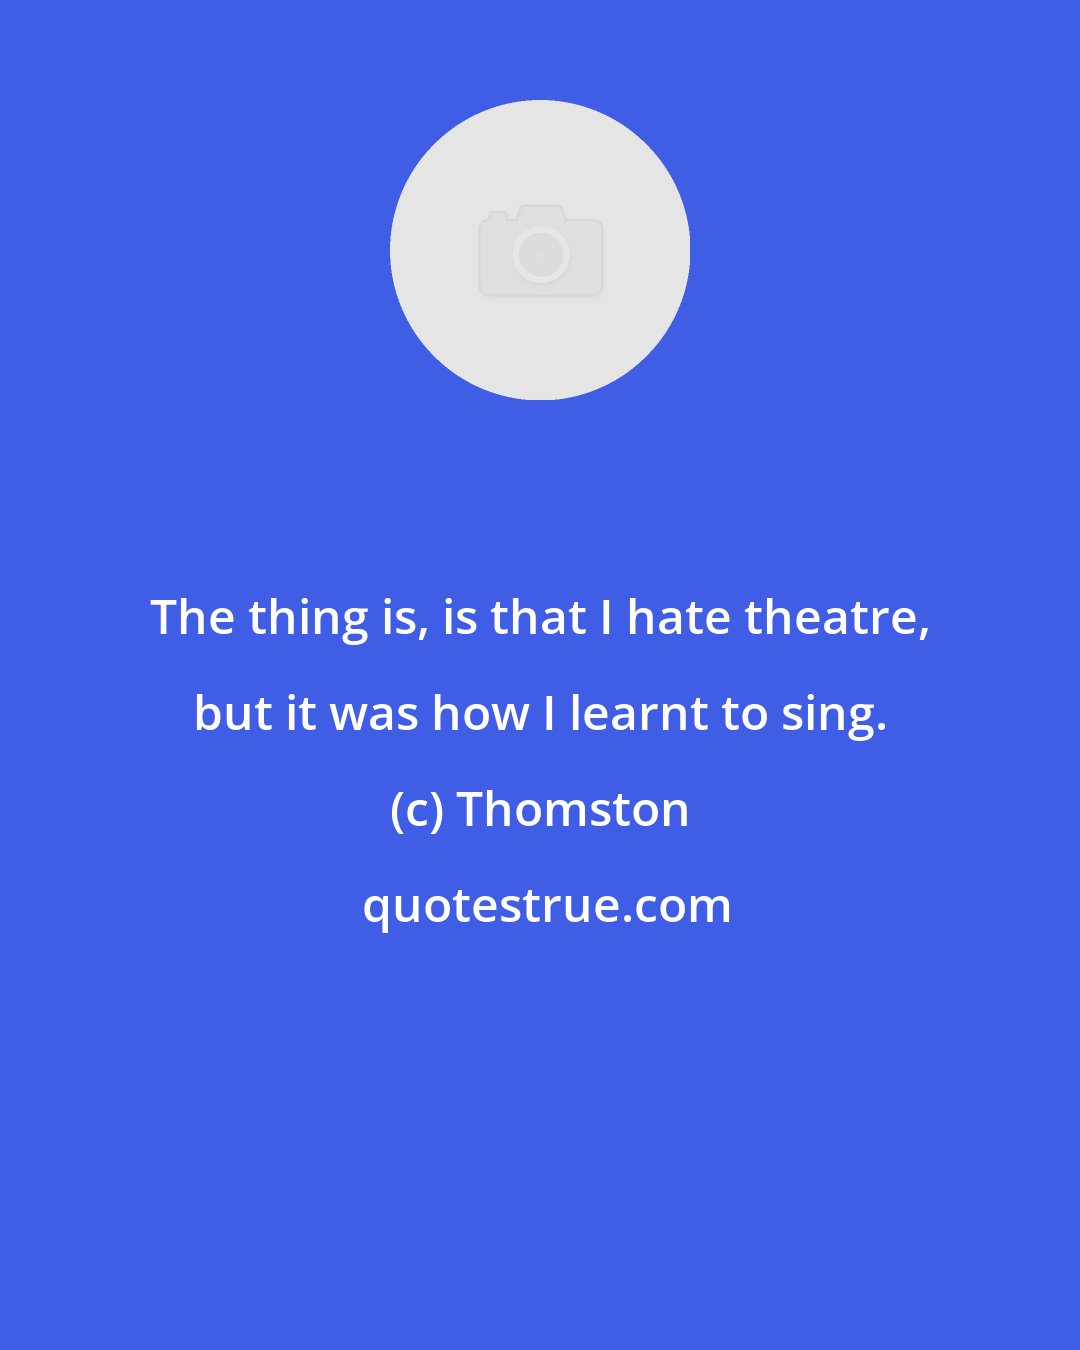 Thomston: The thing is, is that I hate theatre, but it was how I learnt to sing.